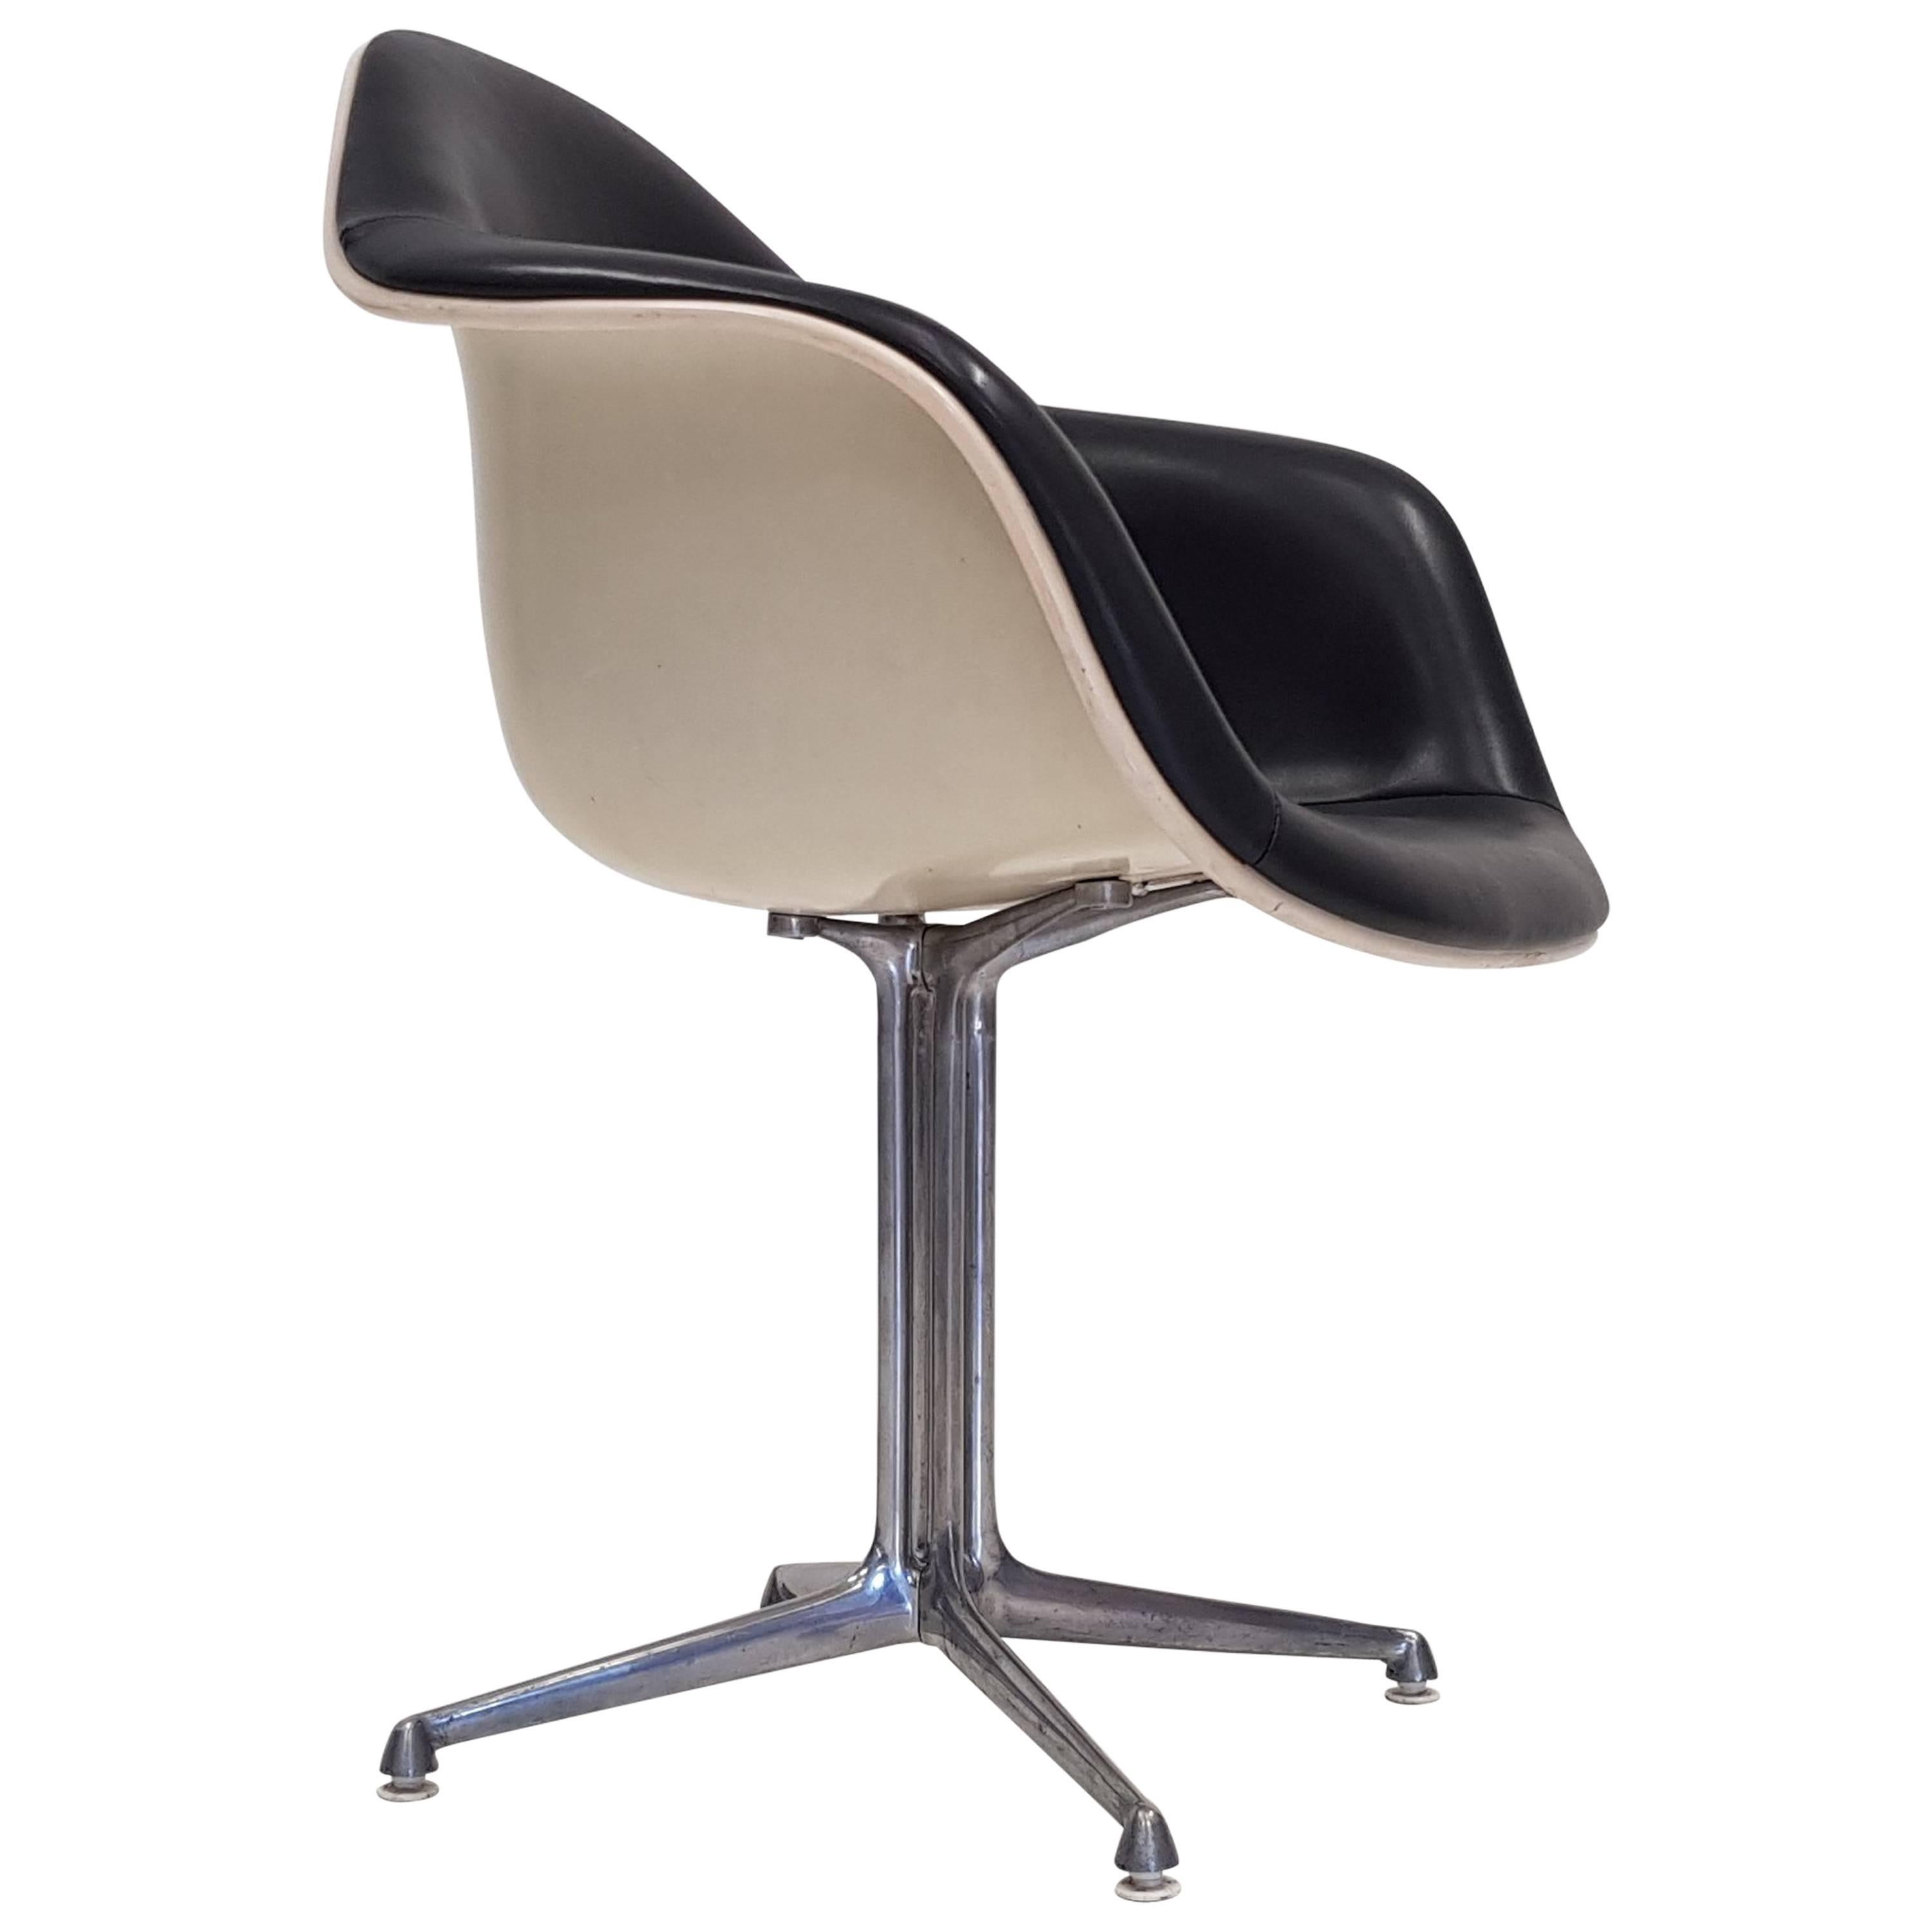 Charles and Ray Eames 'La Fonda' Chair for Herman Miller